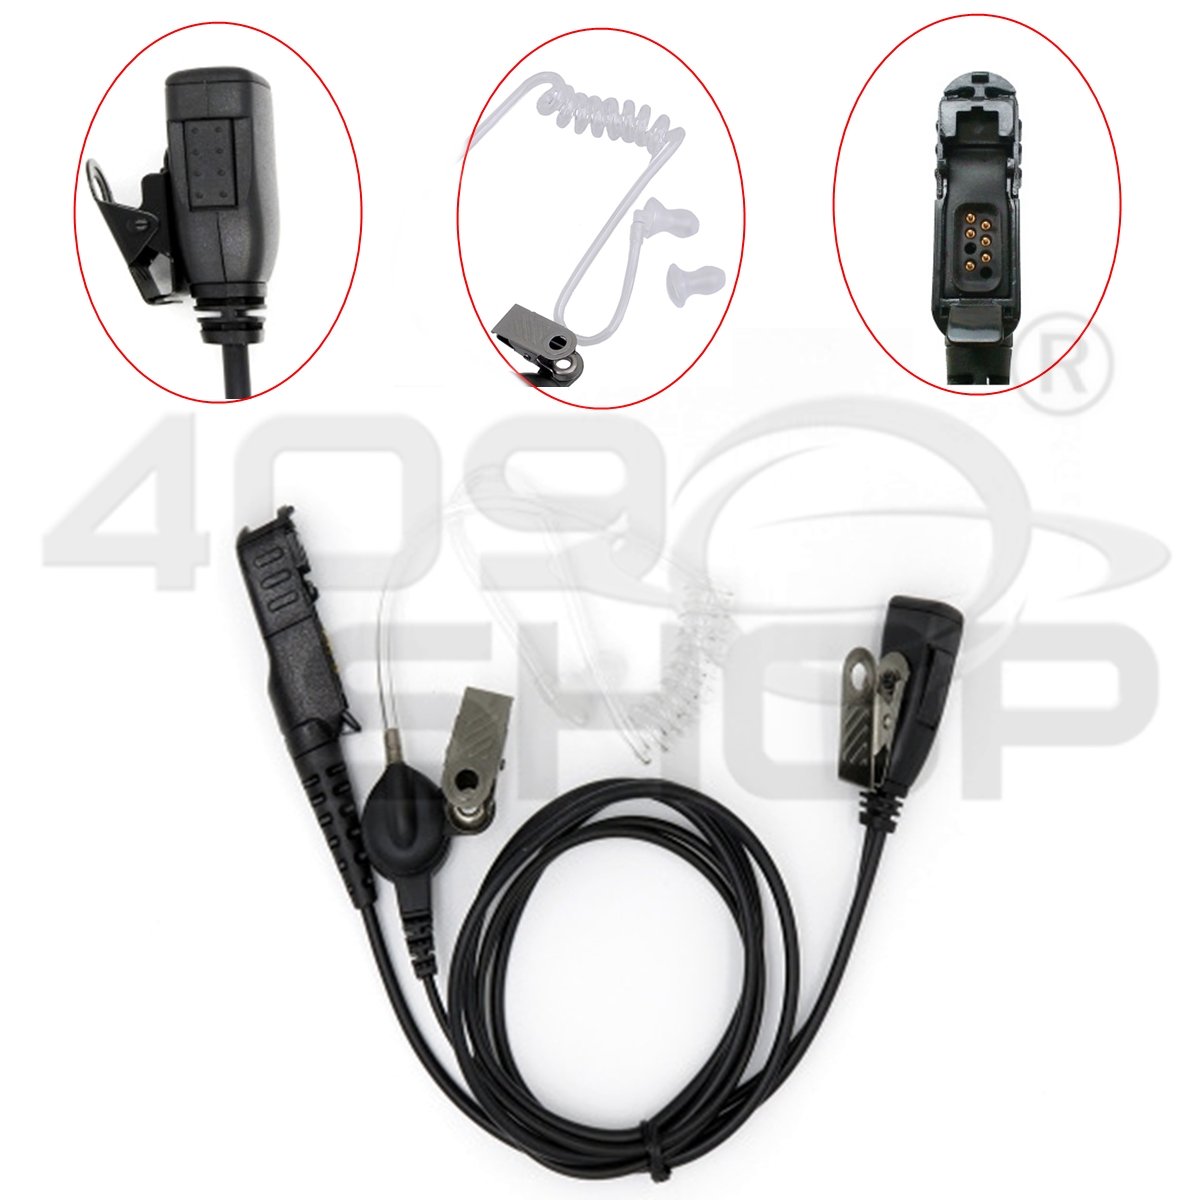 walkie talkie earpiece with Air Acoustic PTT for HYTERA HYT XIRP6620 XIR-E8600 